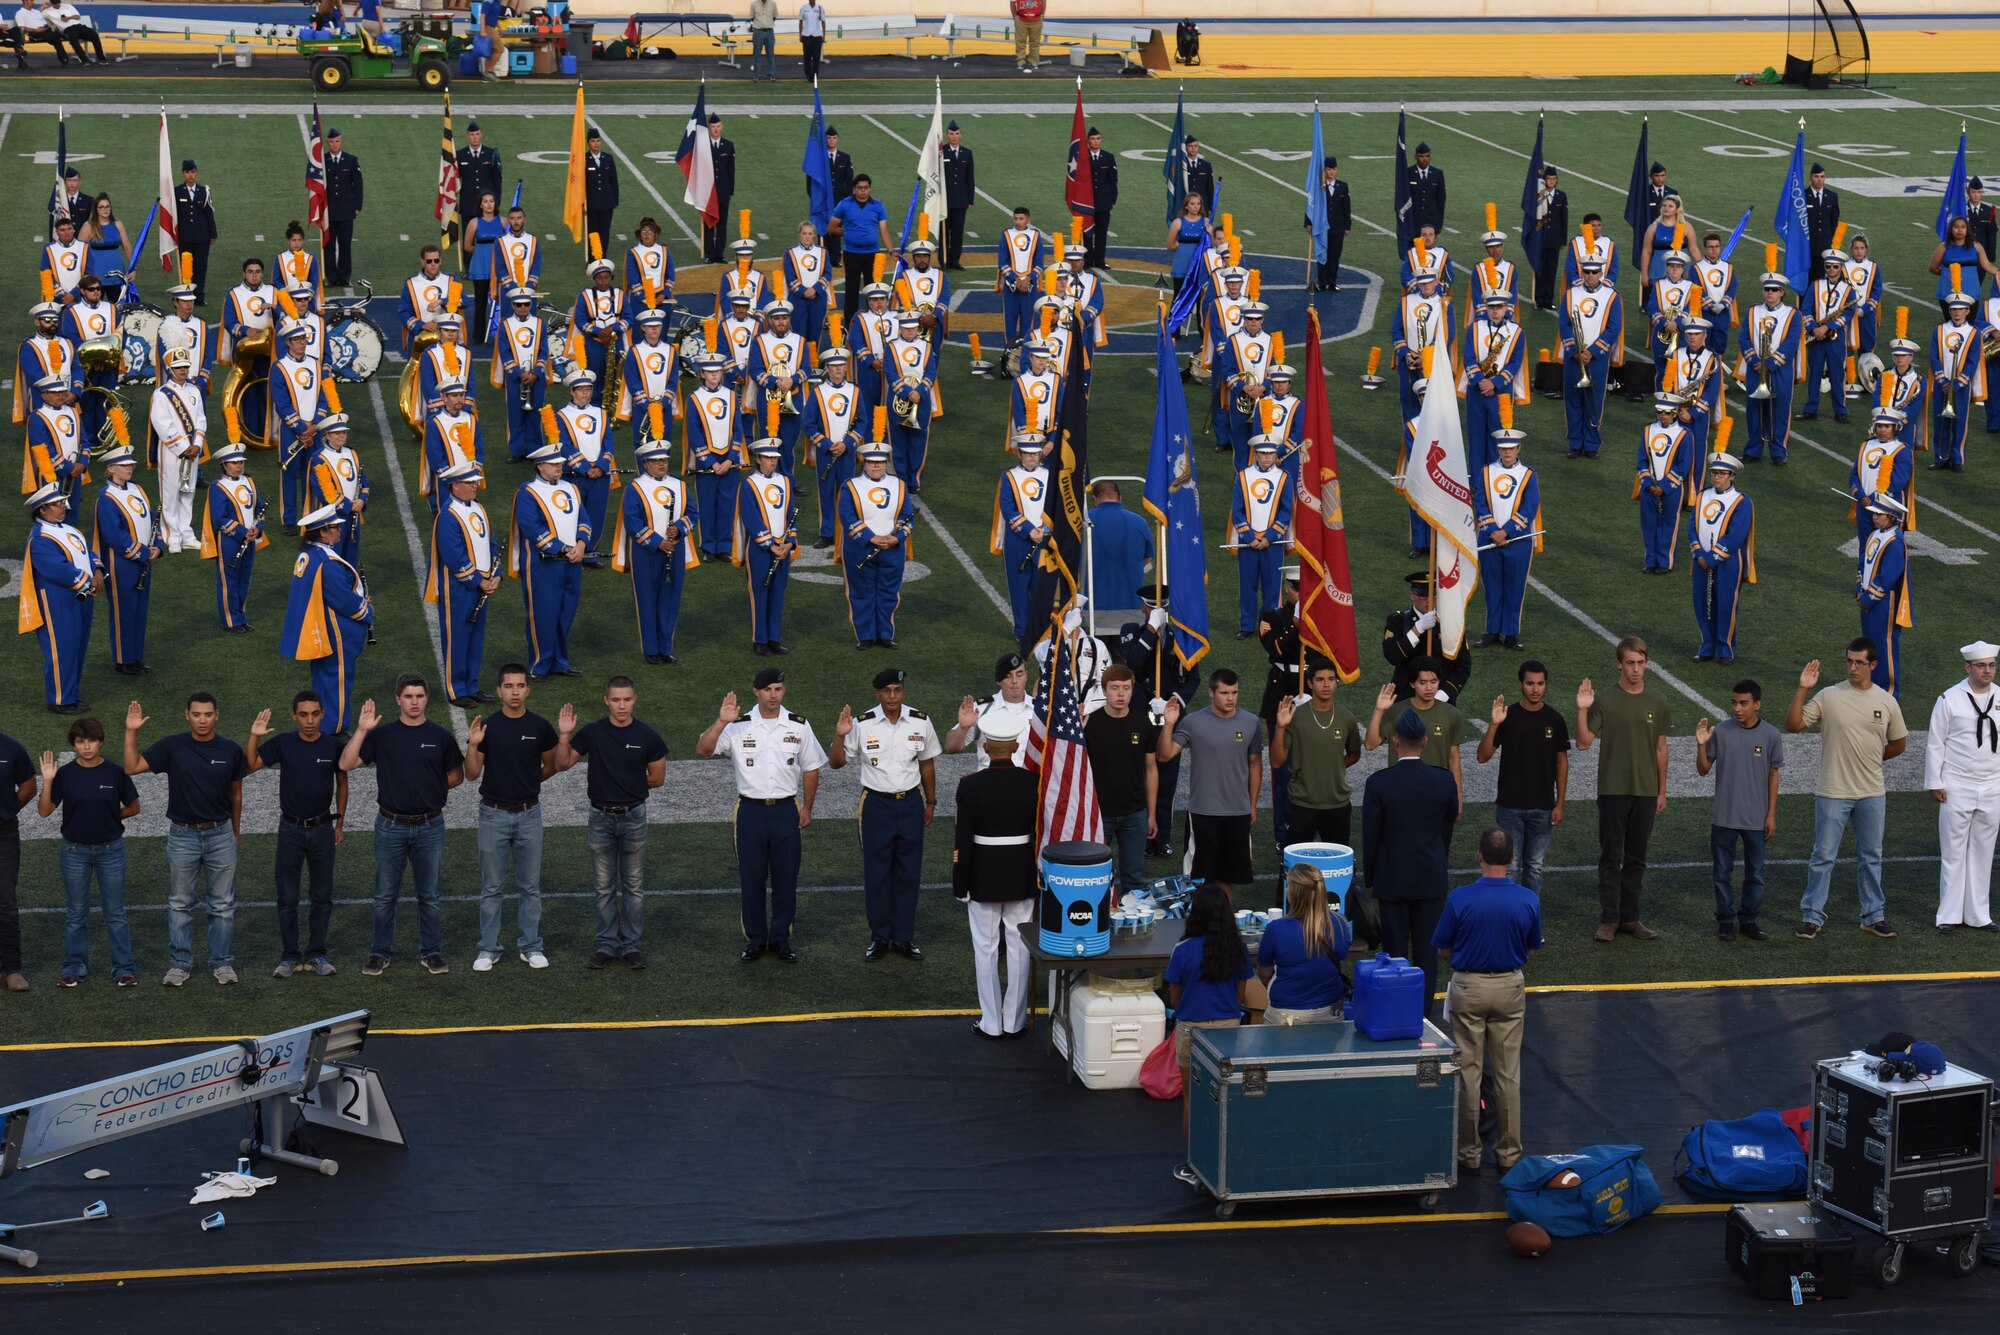 During halftime of the Military Appreciation Day game, approximately 50 delayed enlistment program individuals take the Oath of Enlistment at Angelo State University’s LeGrand in San Angelo Tex. Sept. 9, 2017. U.S. Air Force Col. Ricky Mills, 17th Training Wing commander, administered the oath to future Soldiers, Sailors, Airmen and Marines. (U.S. Air Force photo by Airman Zachary Chapman/Released)